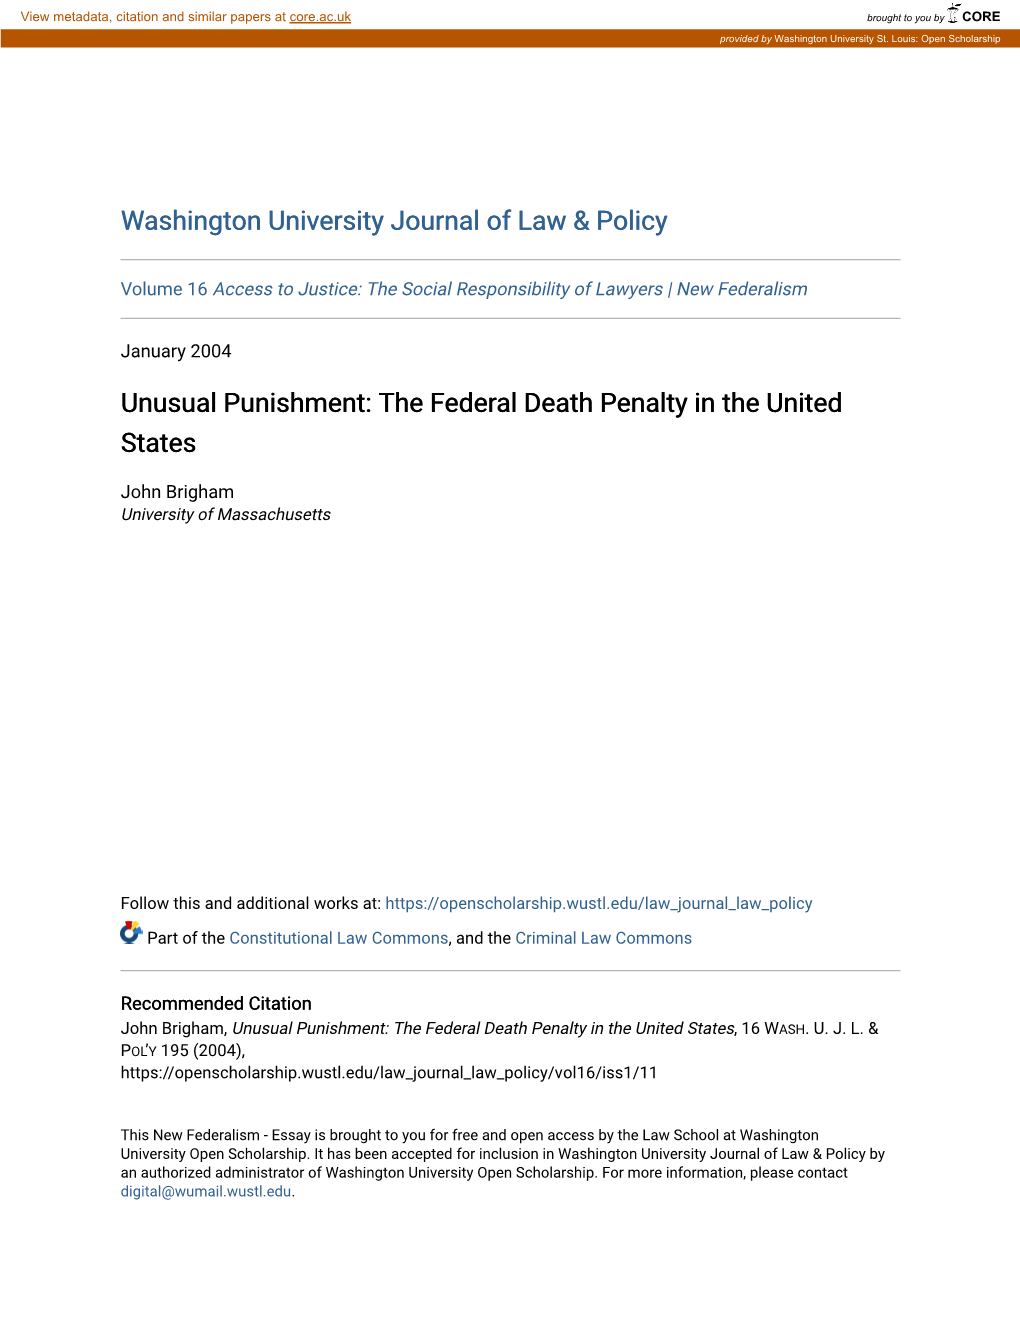 Unusual Punishment: the Federal Death Penalty in the United States